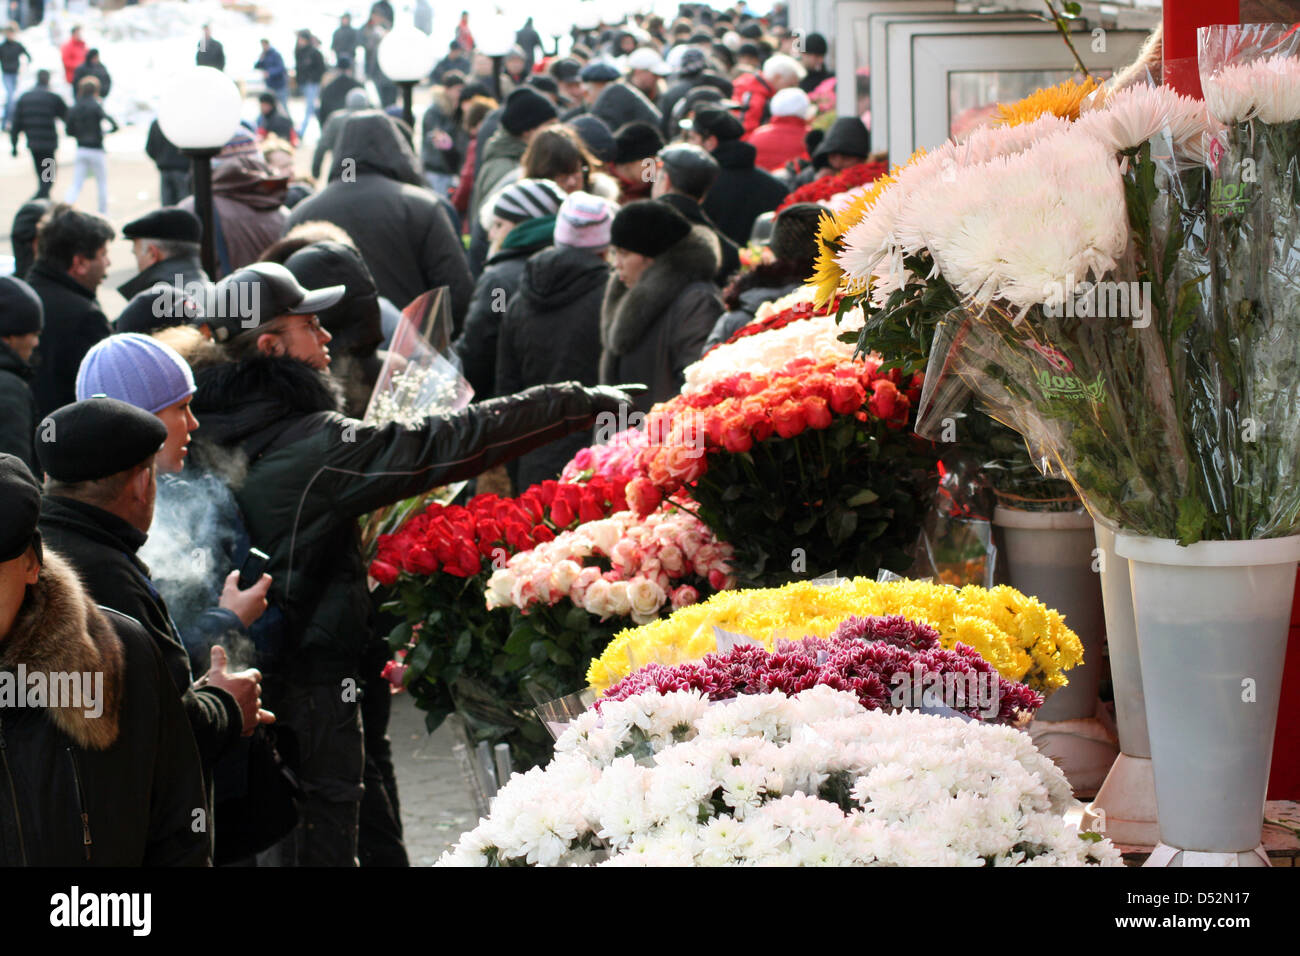 Clients stand at flower stands looking at the wide variety of boquets at Kiew train station in Moscow, Russia, 07 March 2010. During the days previous to the International Women's Day on 08 March, the florists hope for the business of the year: Prices reach from around 1000 rubel (25 euros) for a flowergreeting until 200000 Rubel (5000 euros) for a 60 kilogramm bouquet of 1001 rose Stock Photo